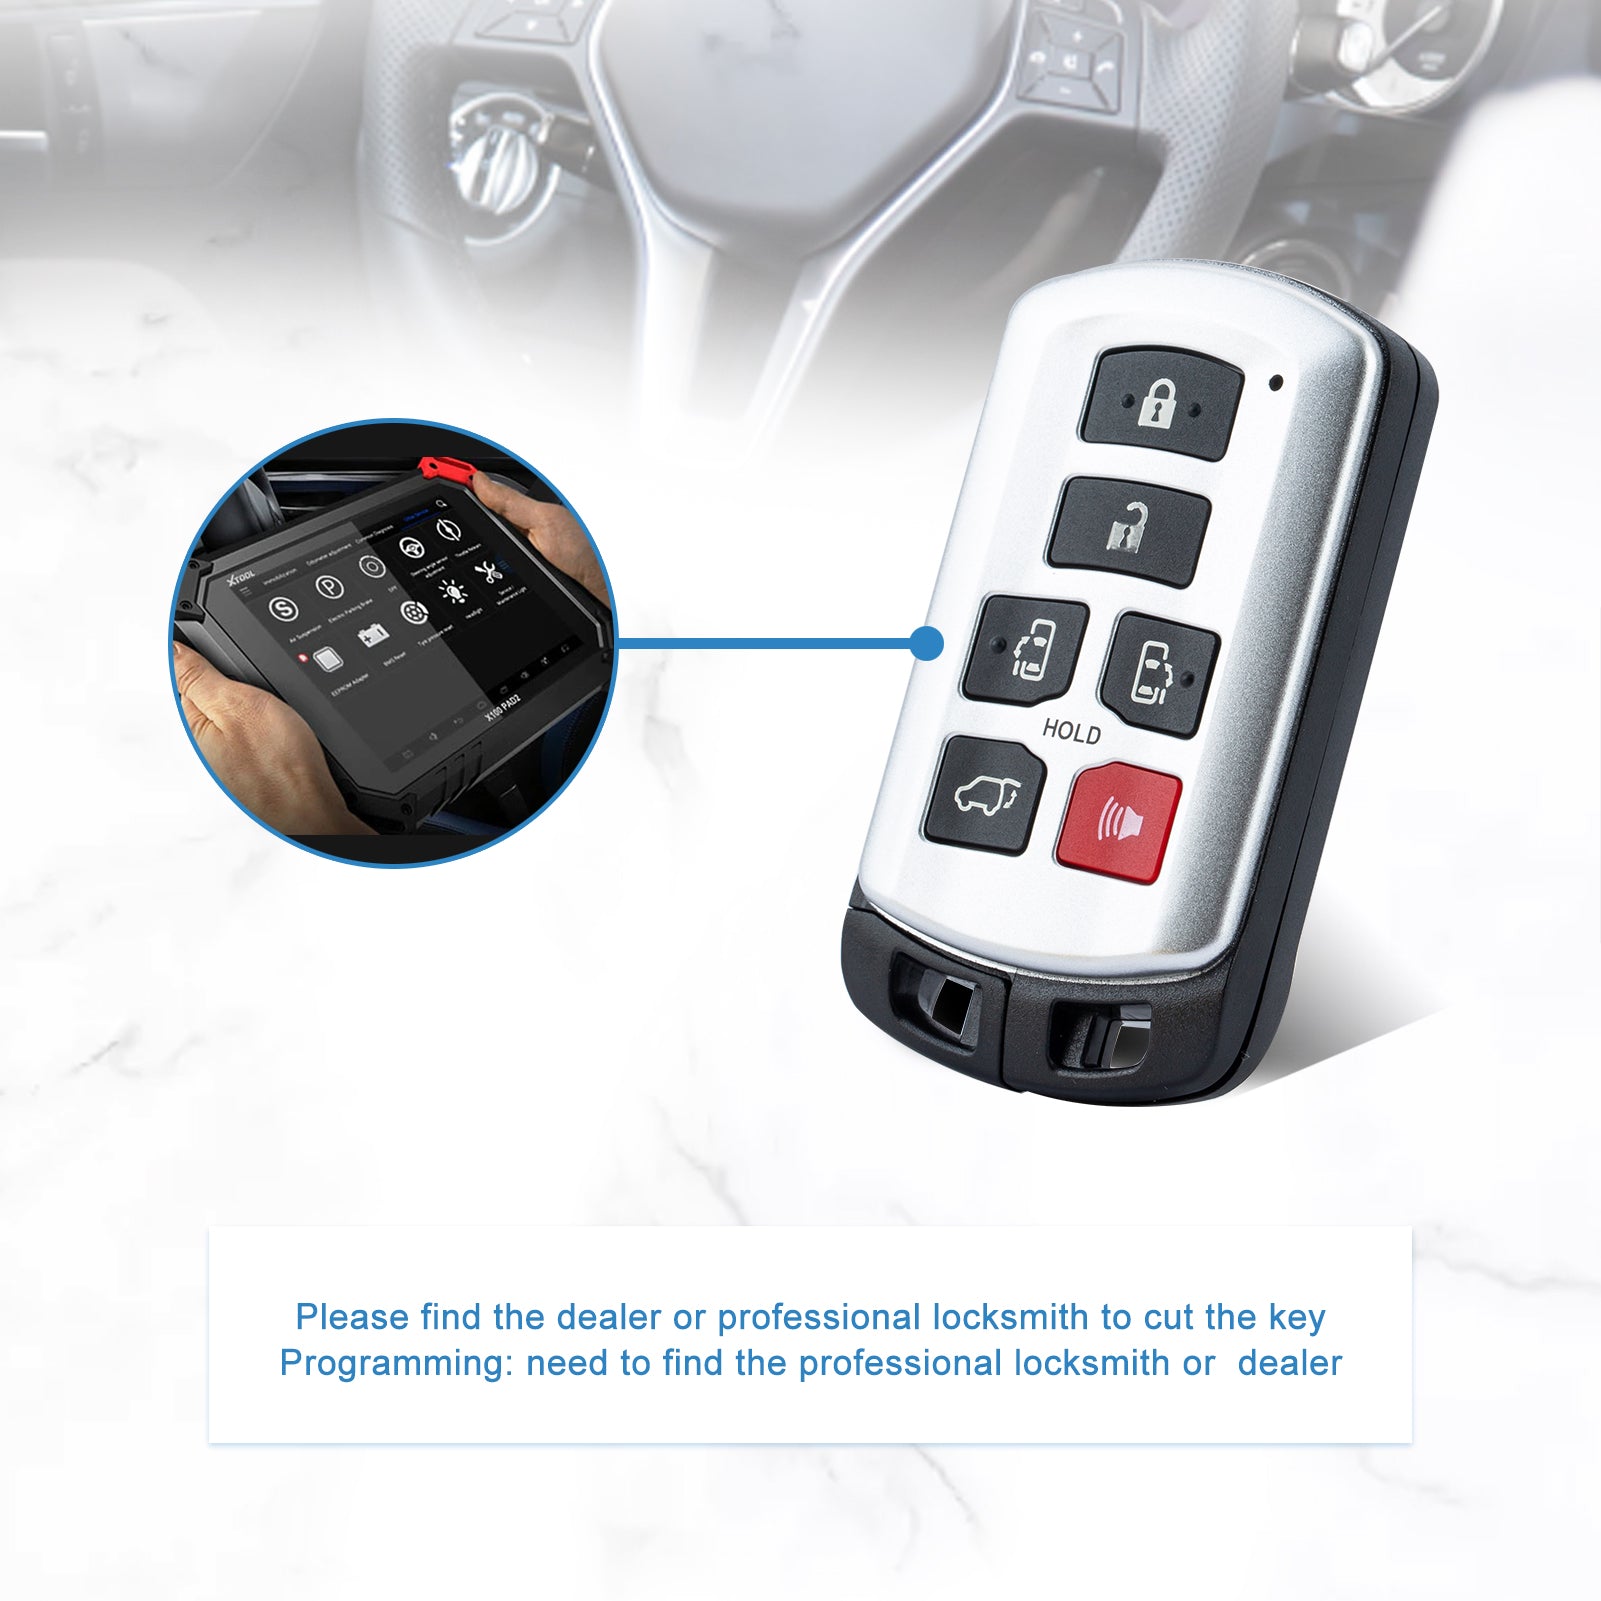 Smart car Key fob Replacement for 2011 - 2019 Toyota Sienna Keyless Remote with FCC ID: HYQ14ADR Keyless Entry Uncut Transponder